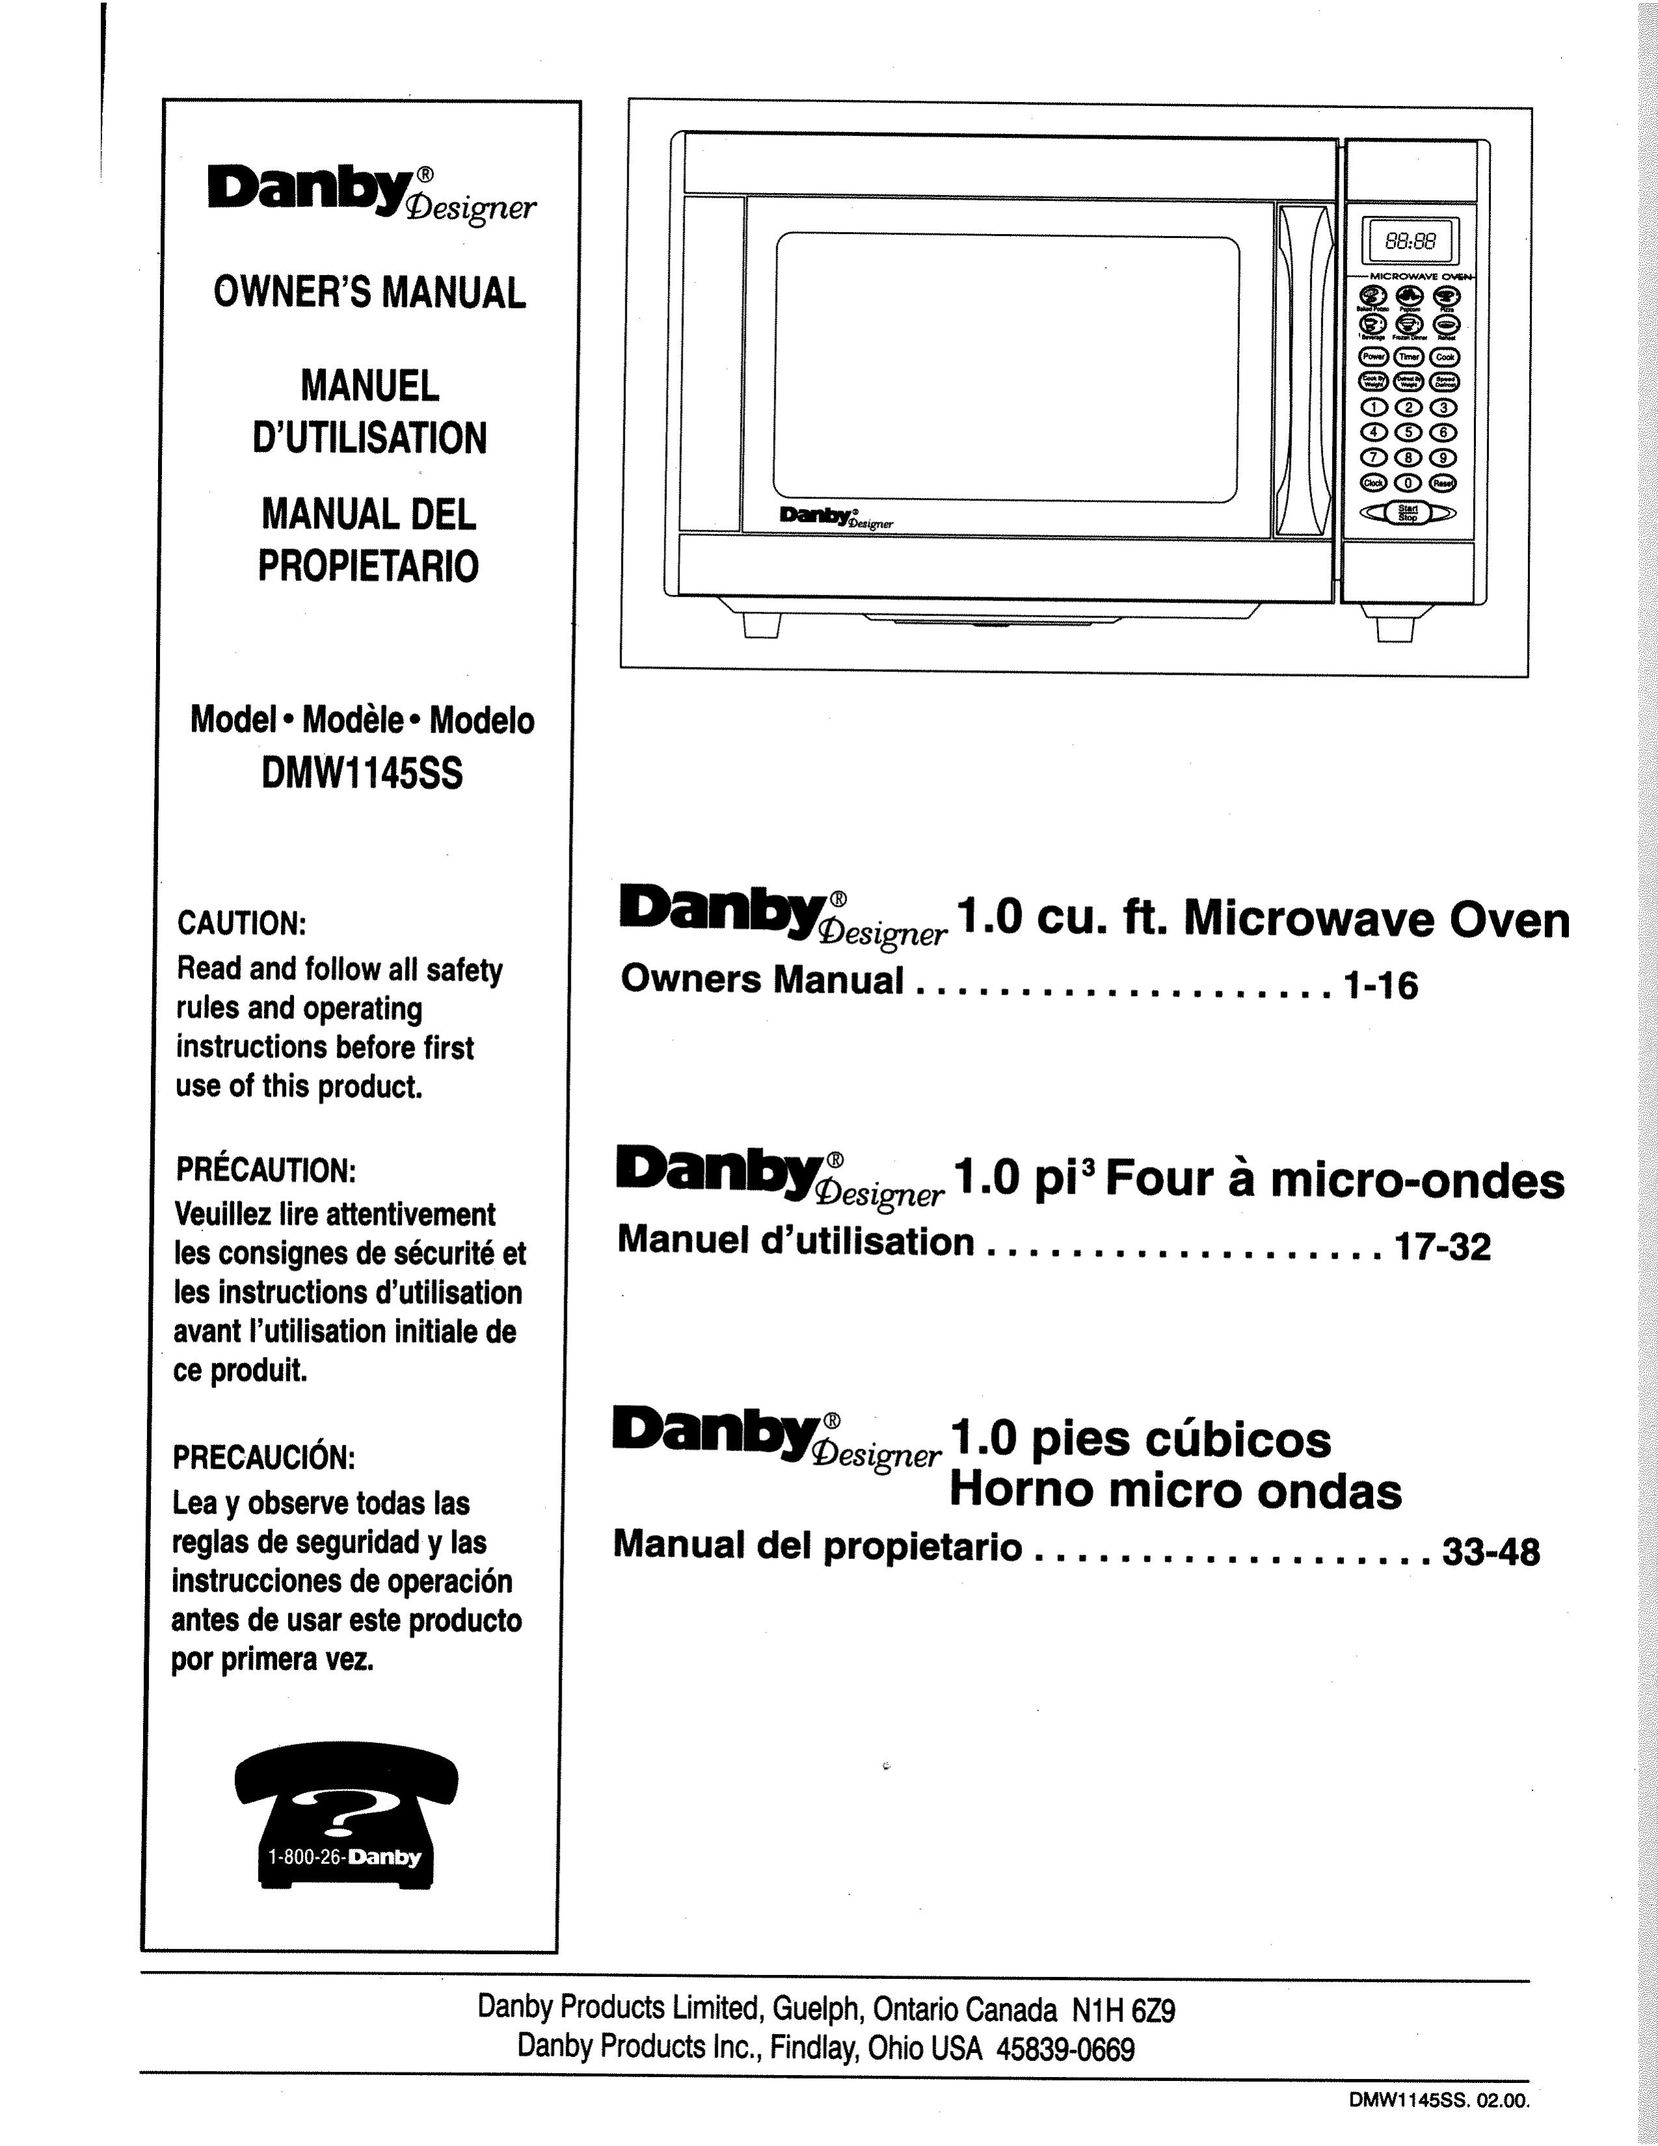 Danby DMW1145SS Microwave Oven User Manual